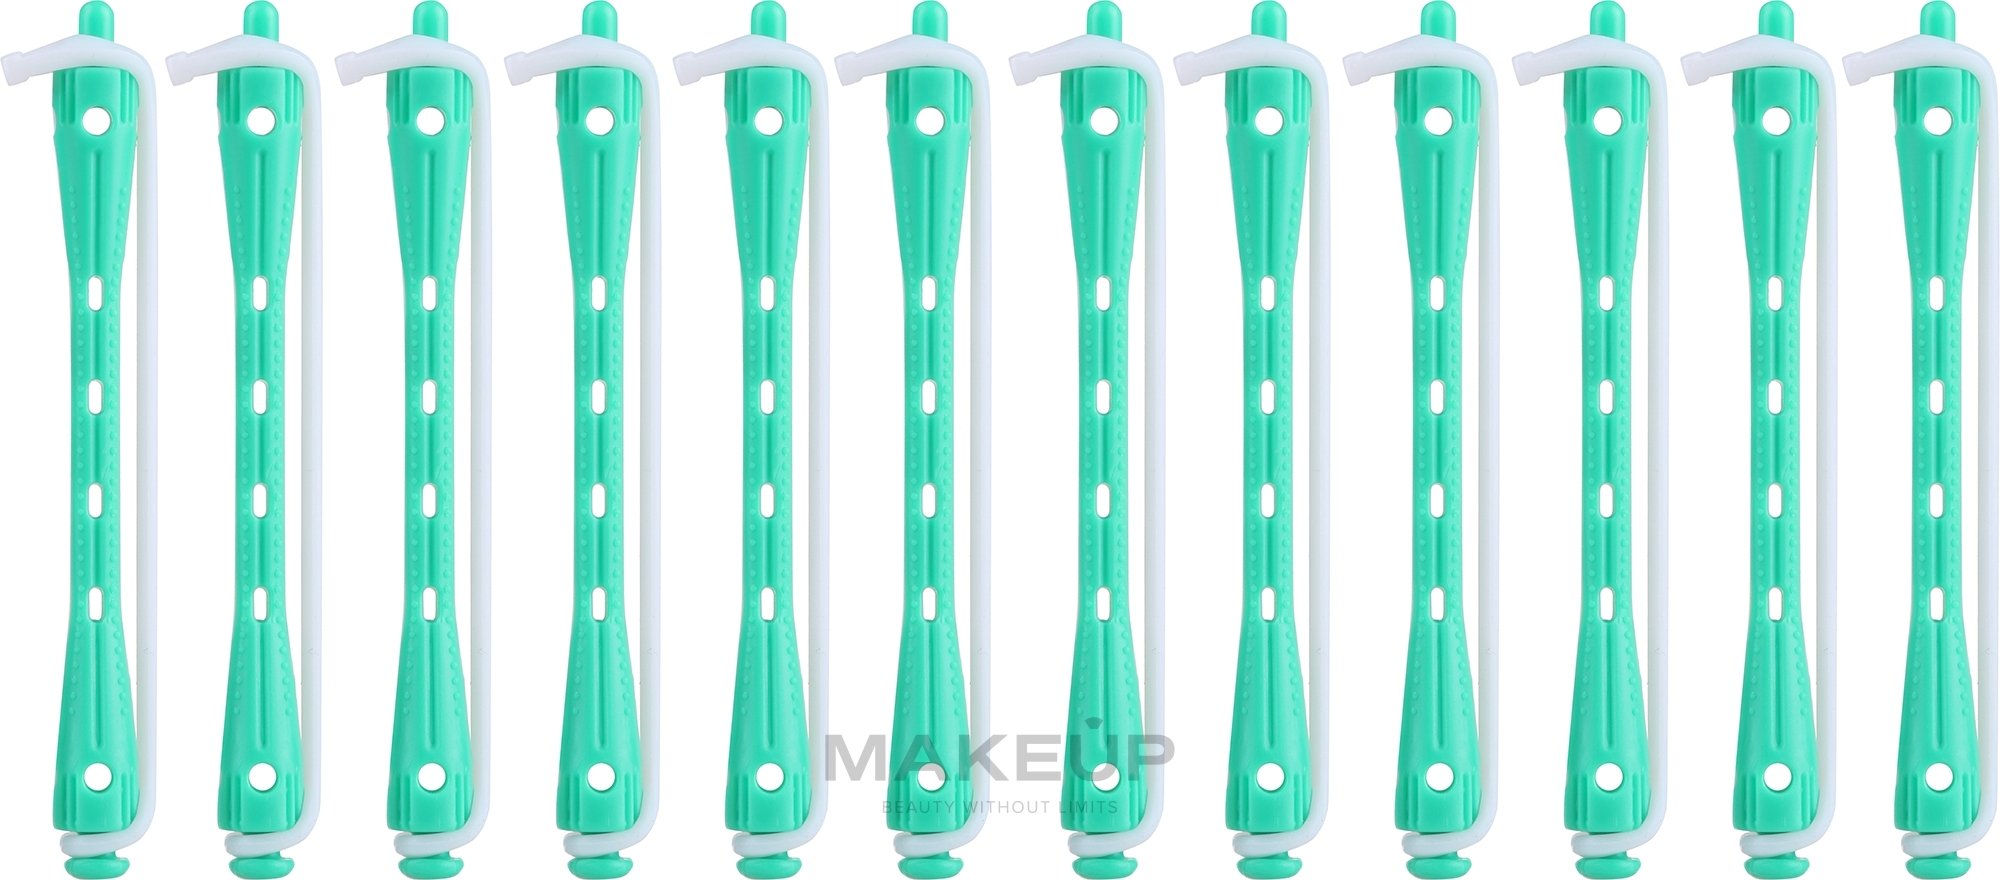 Perm Curlers, turquoise beige, 12 pcs - Donegal Hair Curlers — photo 12 szt.